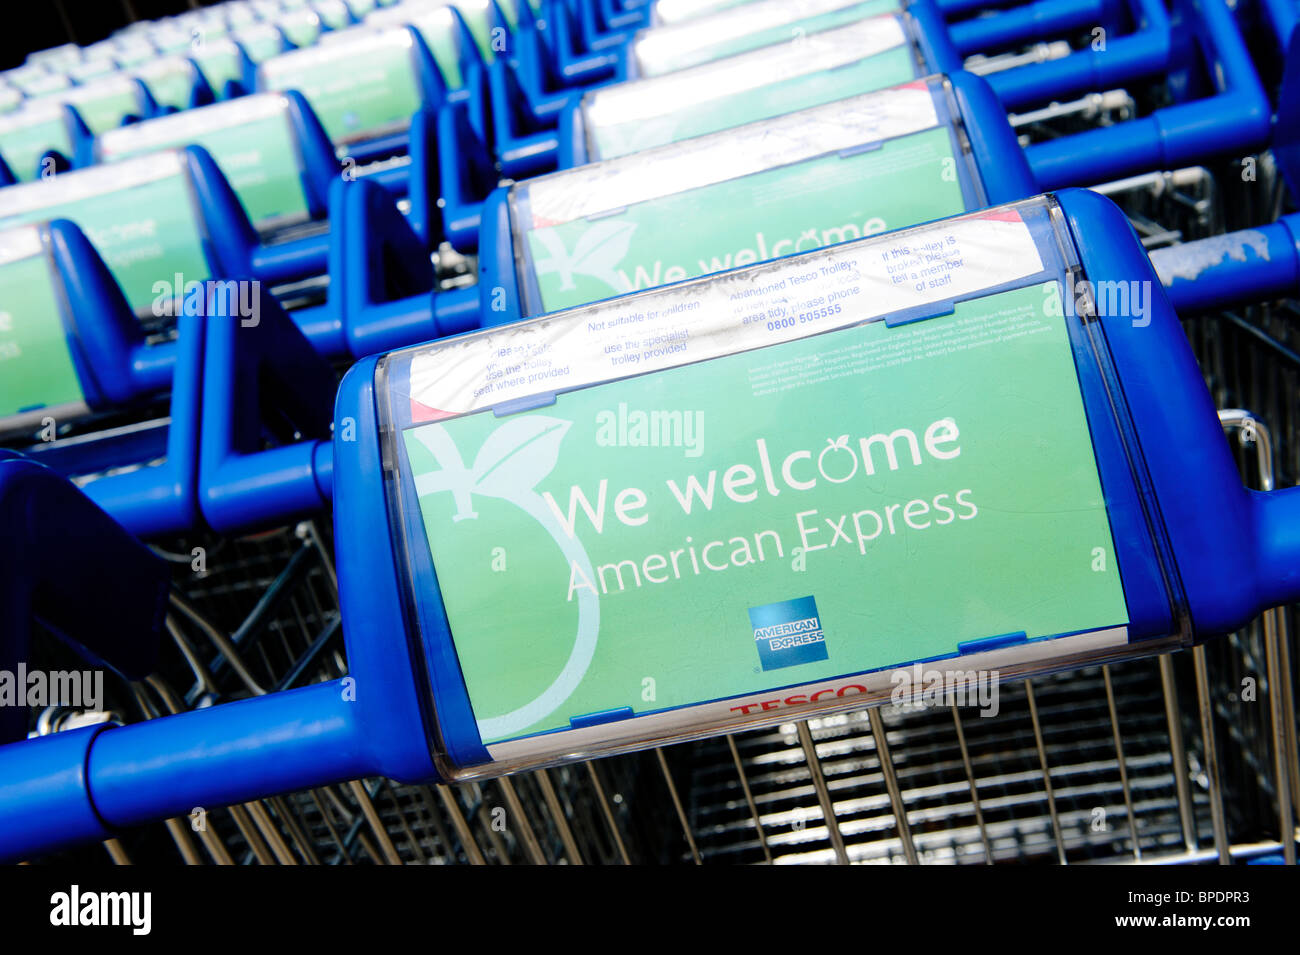 Several shoppings trolleys parked up in a line outside a Tesco supermarket Stock Photo